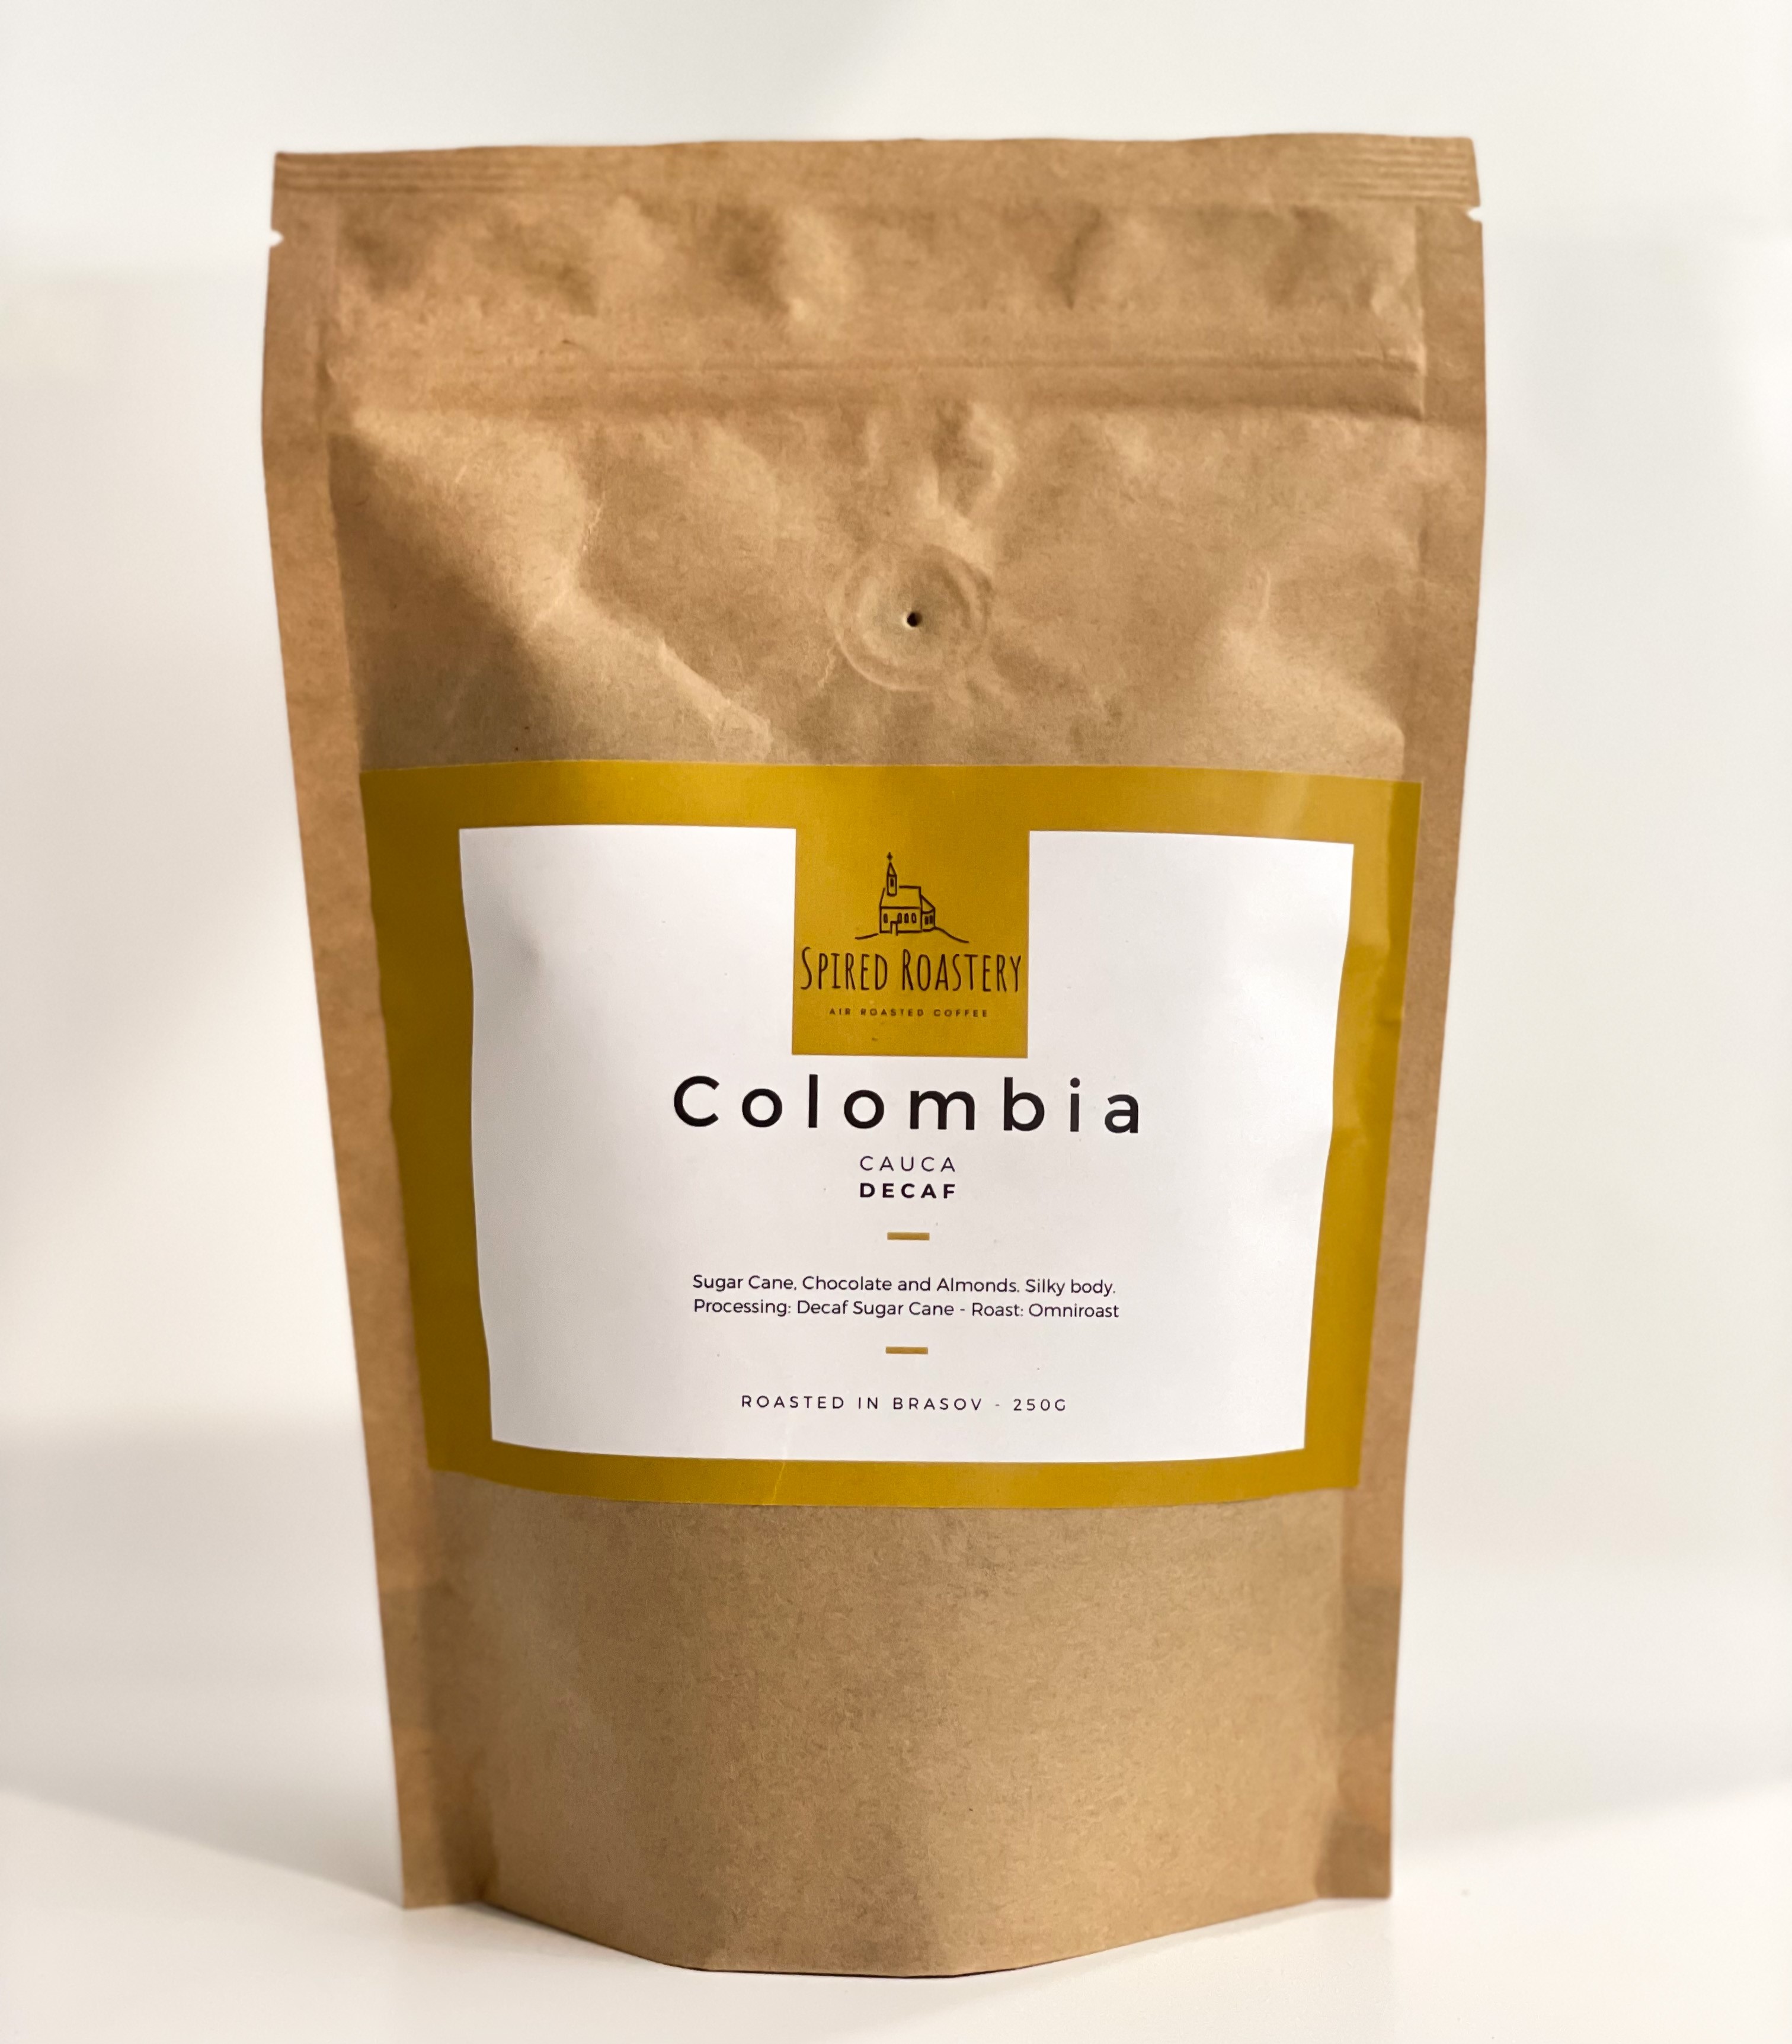 Colombia: Cauca Decaf